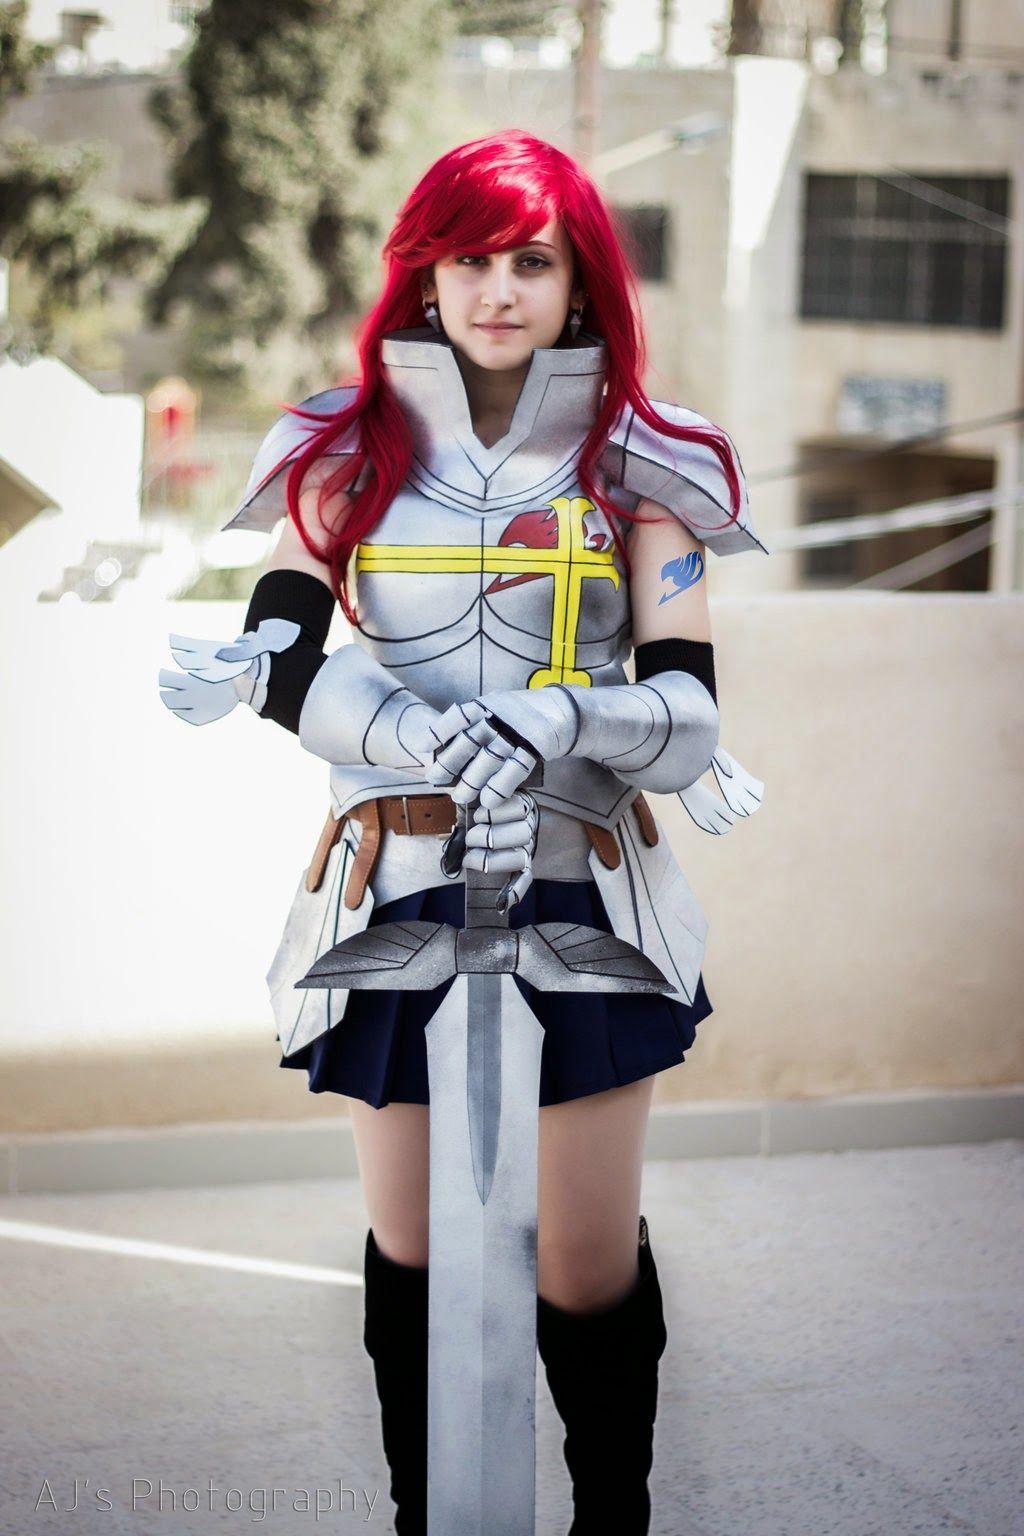 70+ Hot Pictures Of Erza Scarlet from Fairy Tale Which Will Leave You Dumbstruck 210